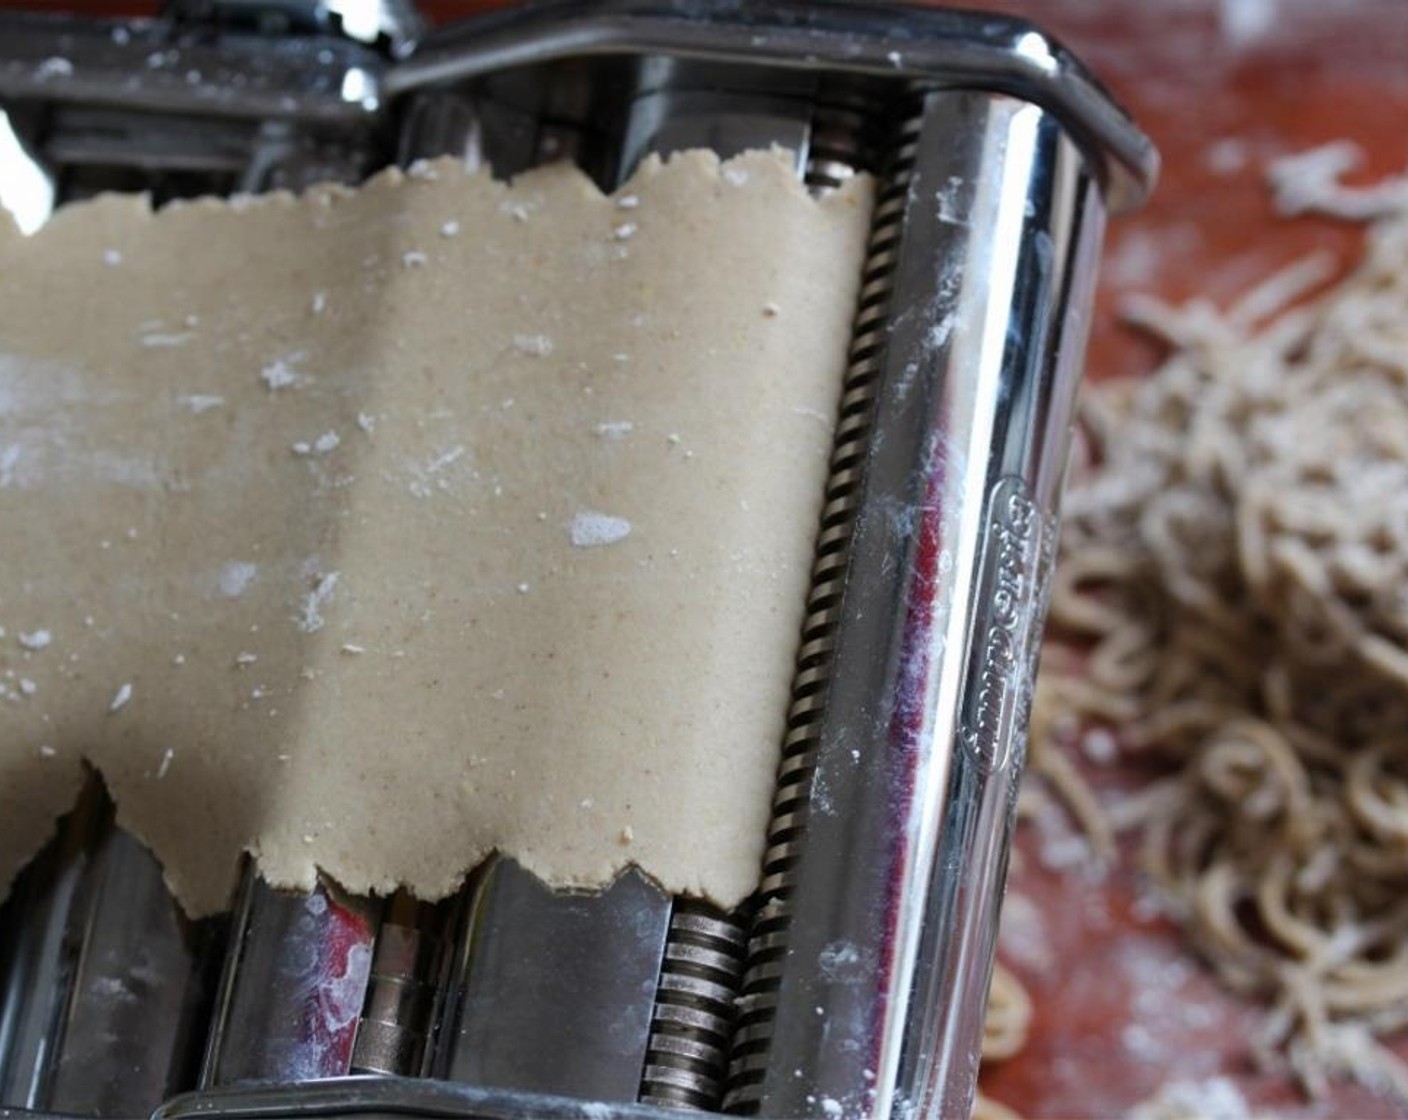 step 4 Divide the dough in half and place one piece on a floured work surface. Press until flat and then feed through the pasta machine 10 times on the widest setting, folding it neatly between each pass.